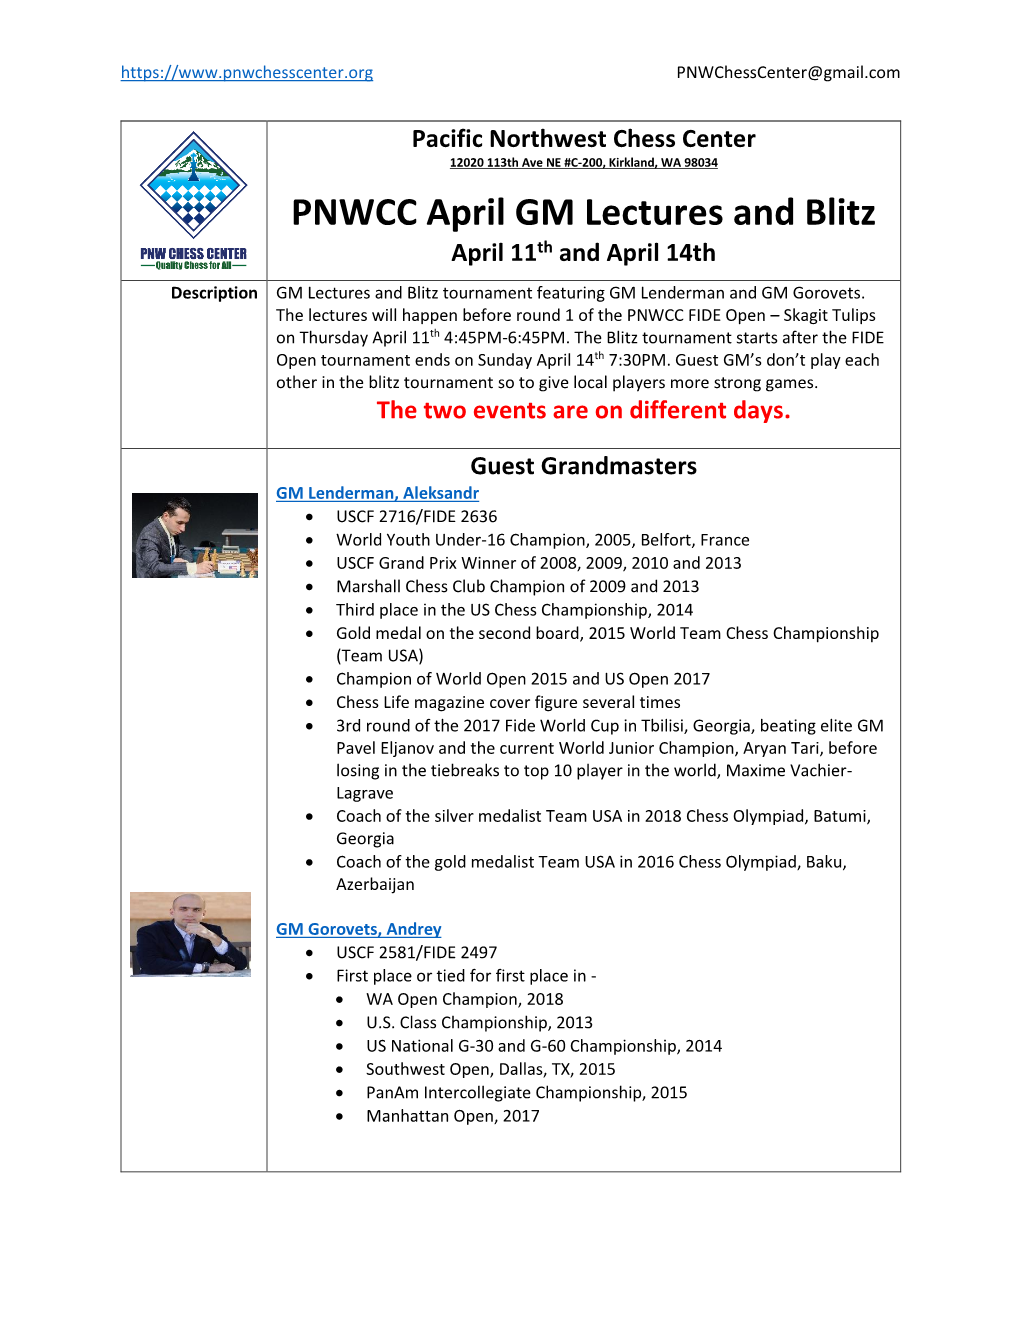 PNWCC GM Lectures + Blitz with GM Lenderman and GM Gorovets